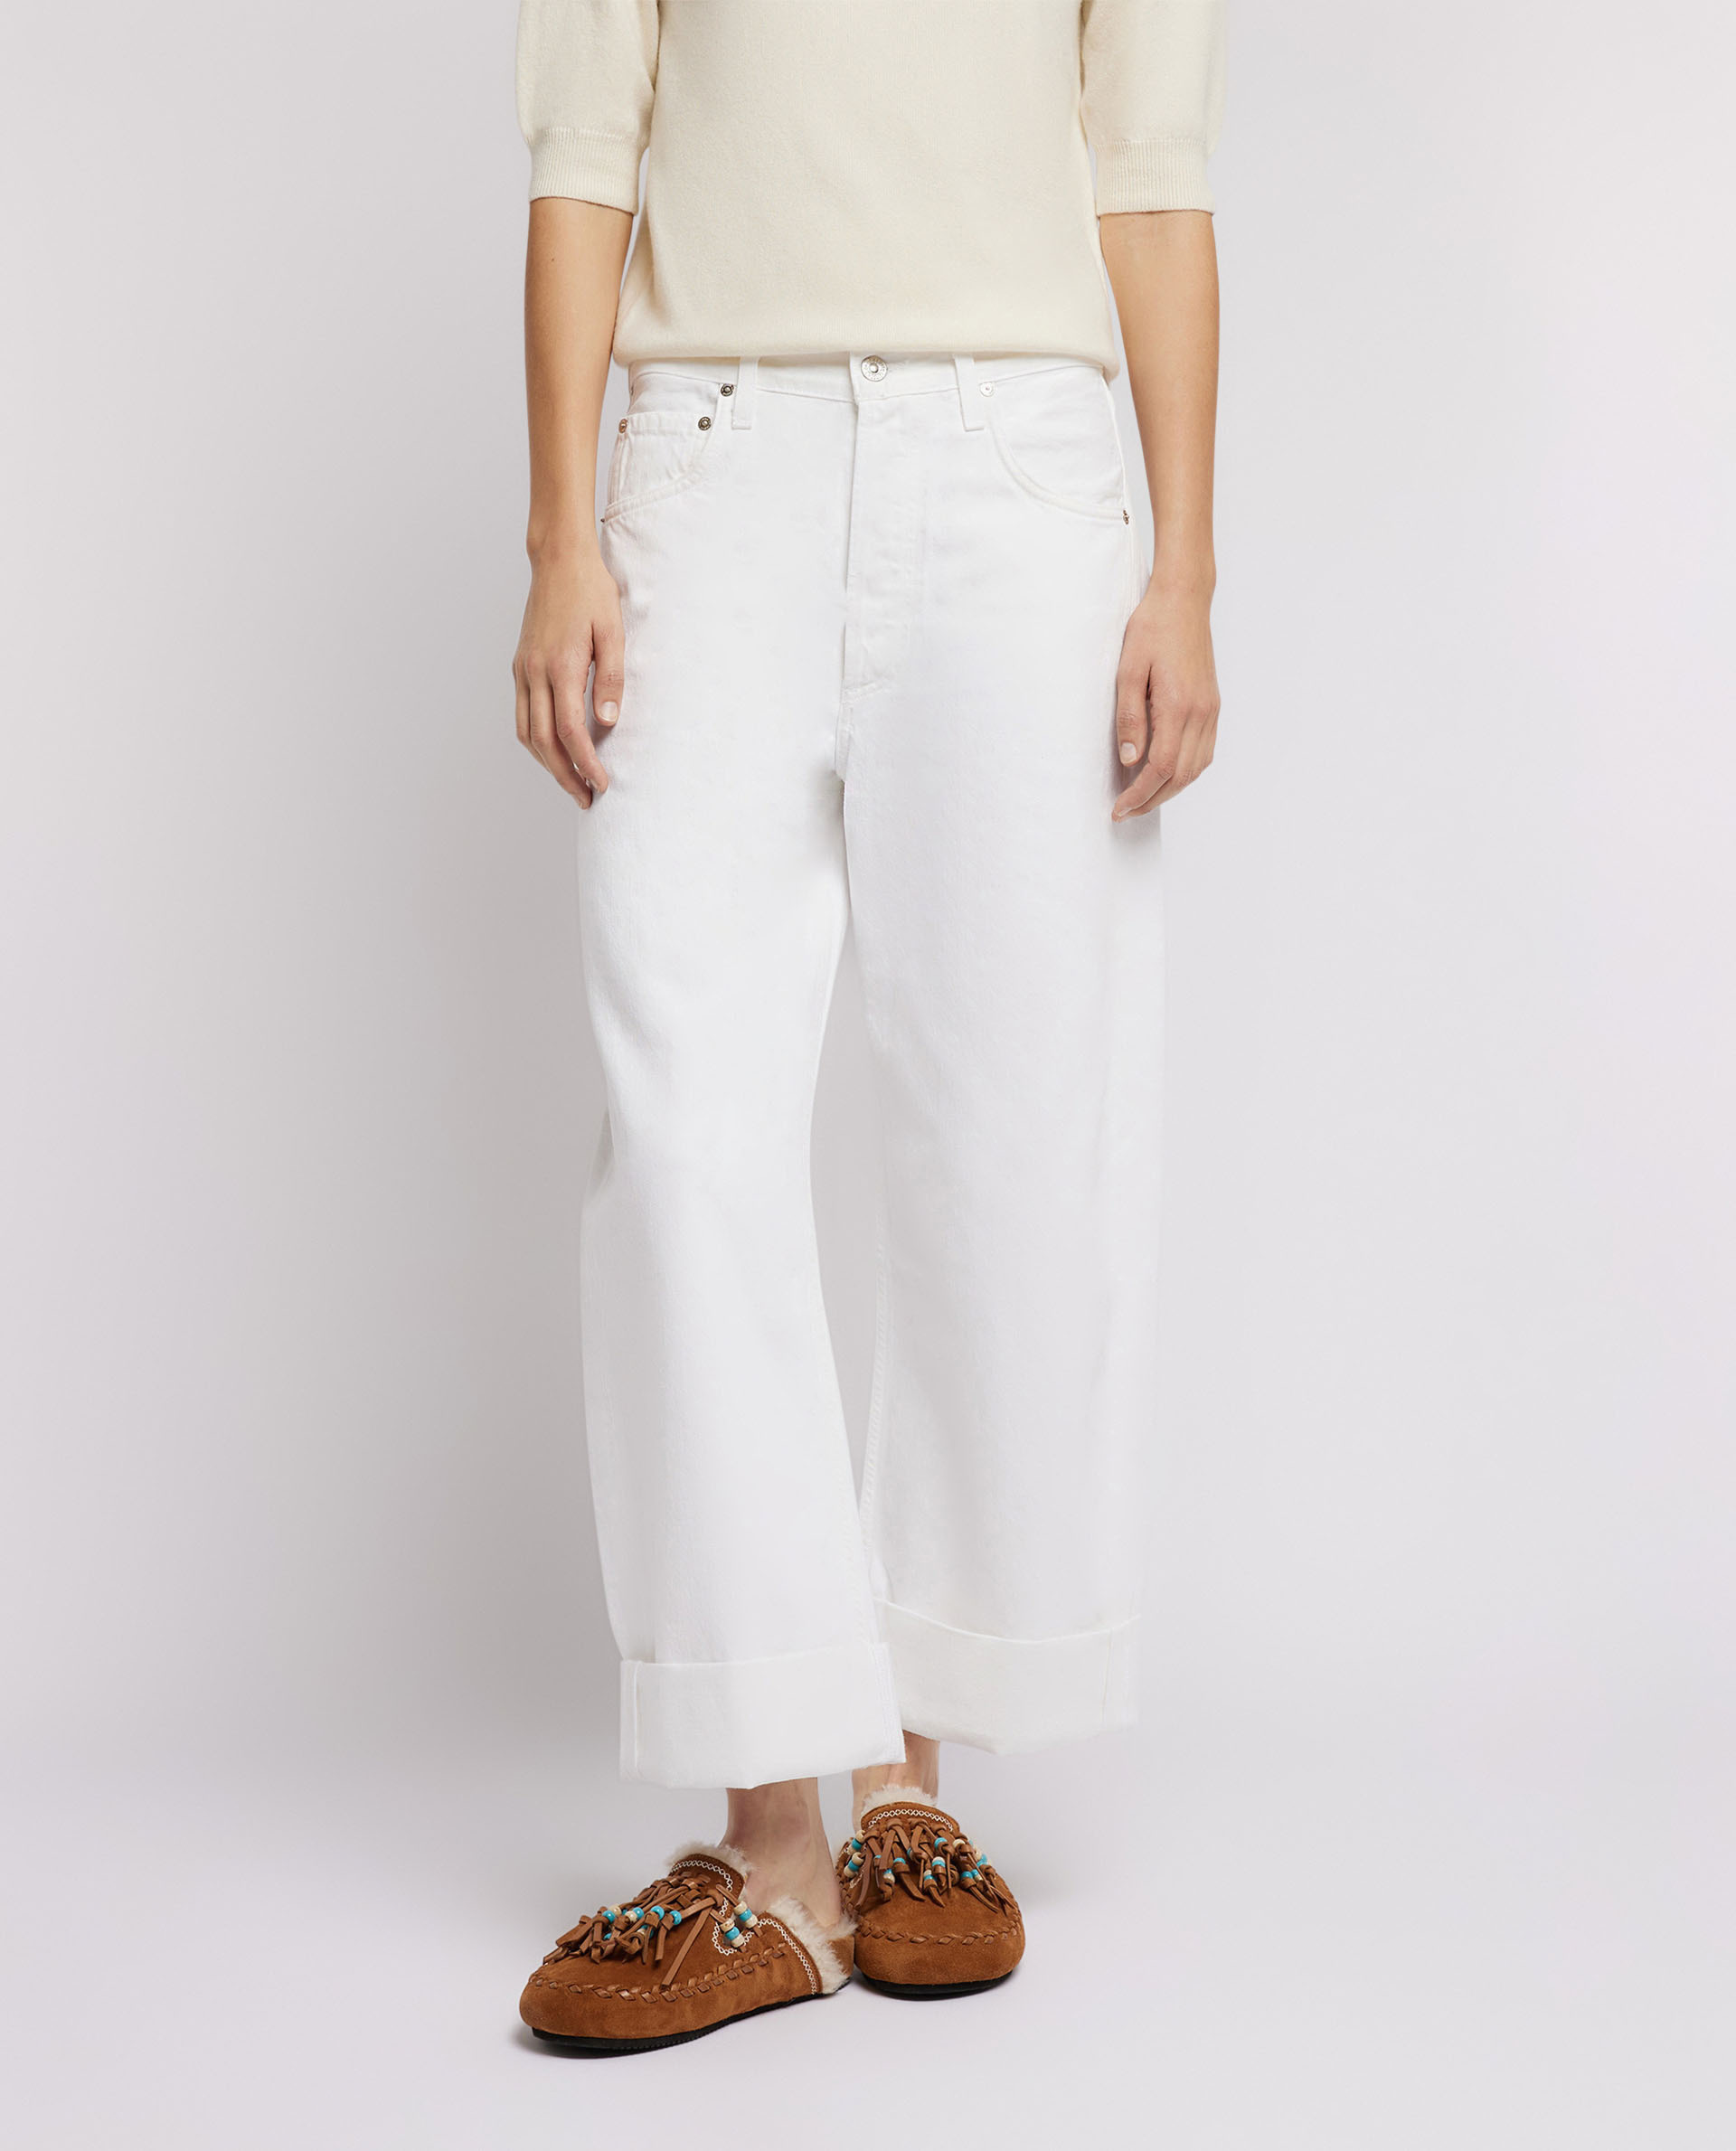 Citizens of Humanity - Ameline Utility Jogger in Iza – Blond Genius